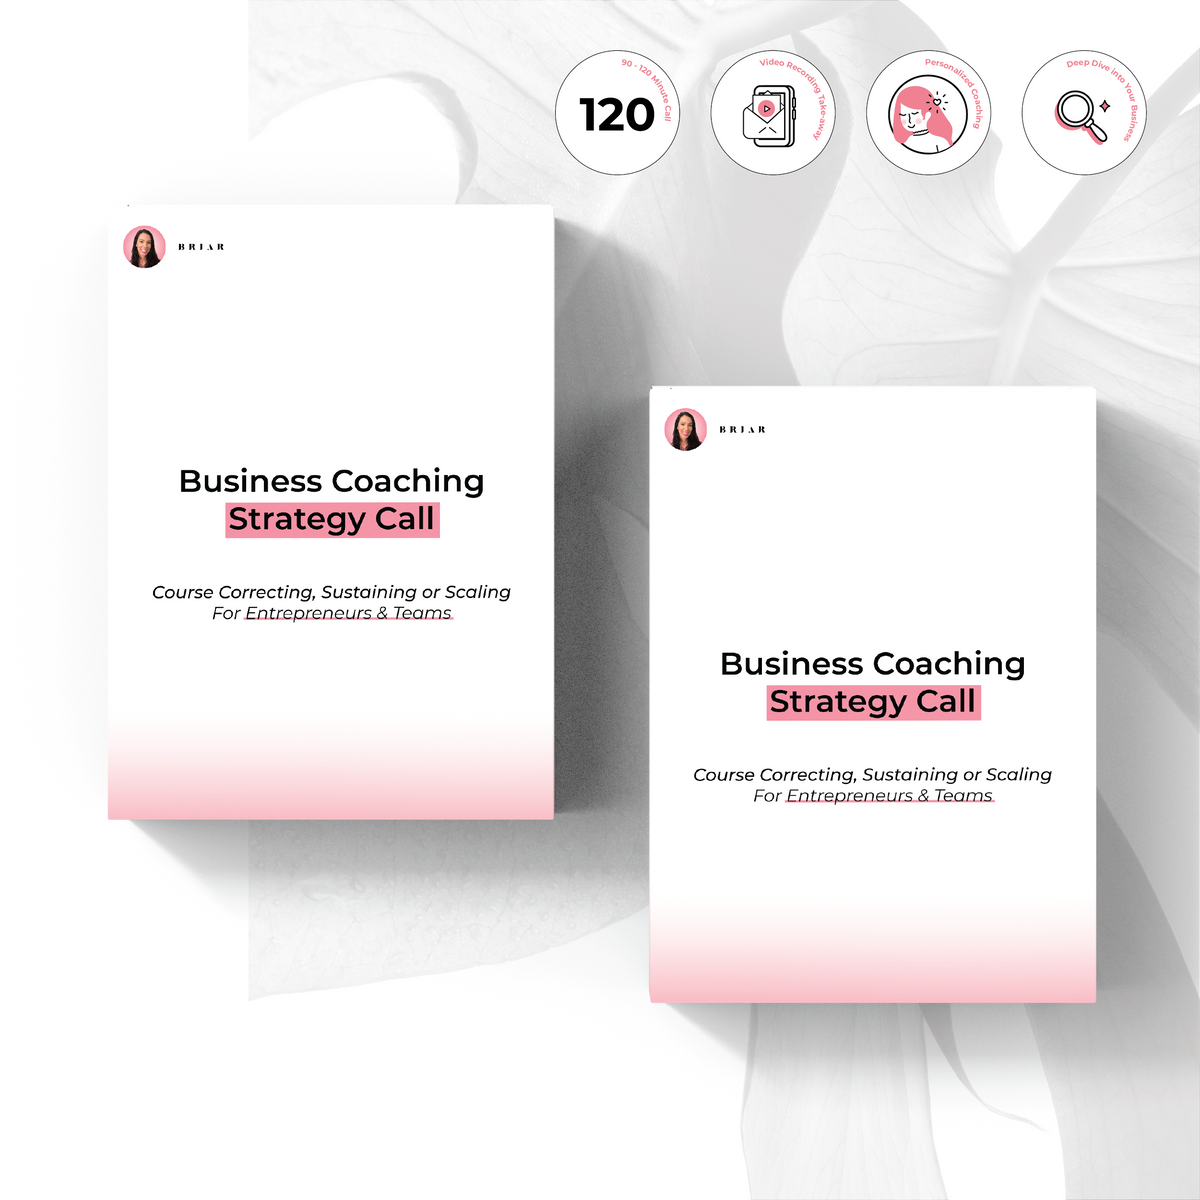 Business Coaching Strategy Call